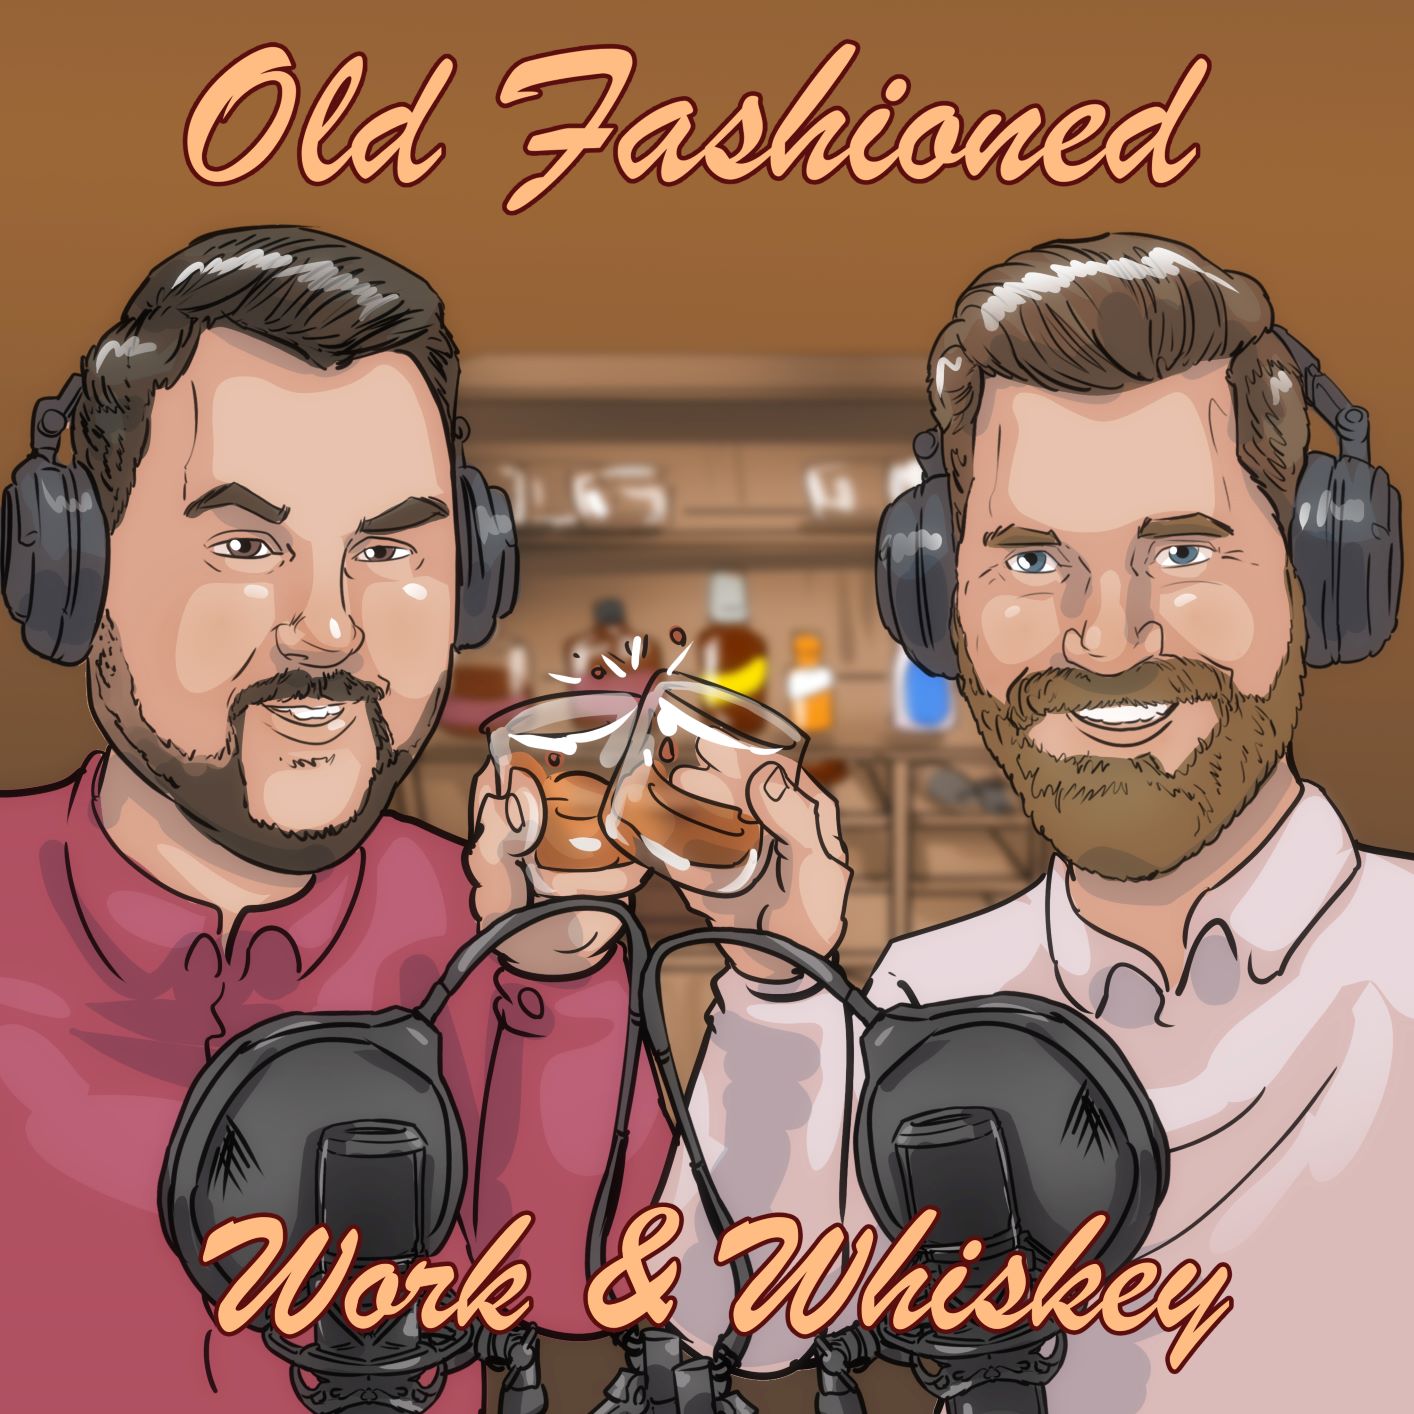 Artwork for Old Fashioned: Work & Whiskey